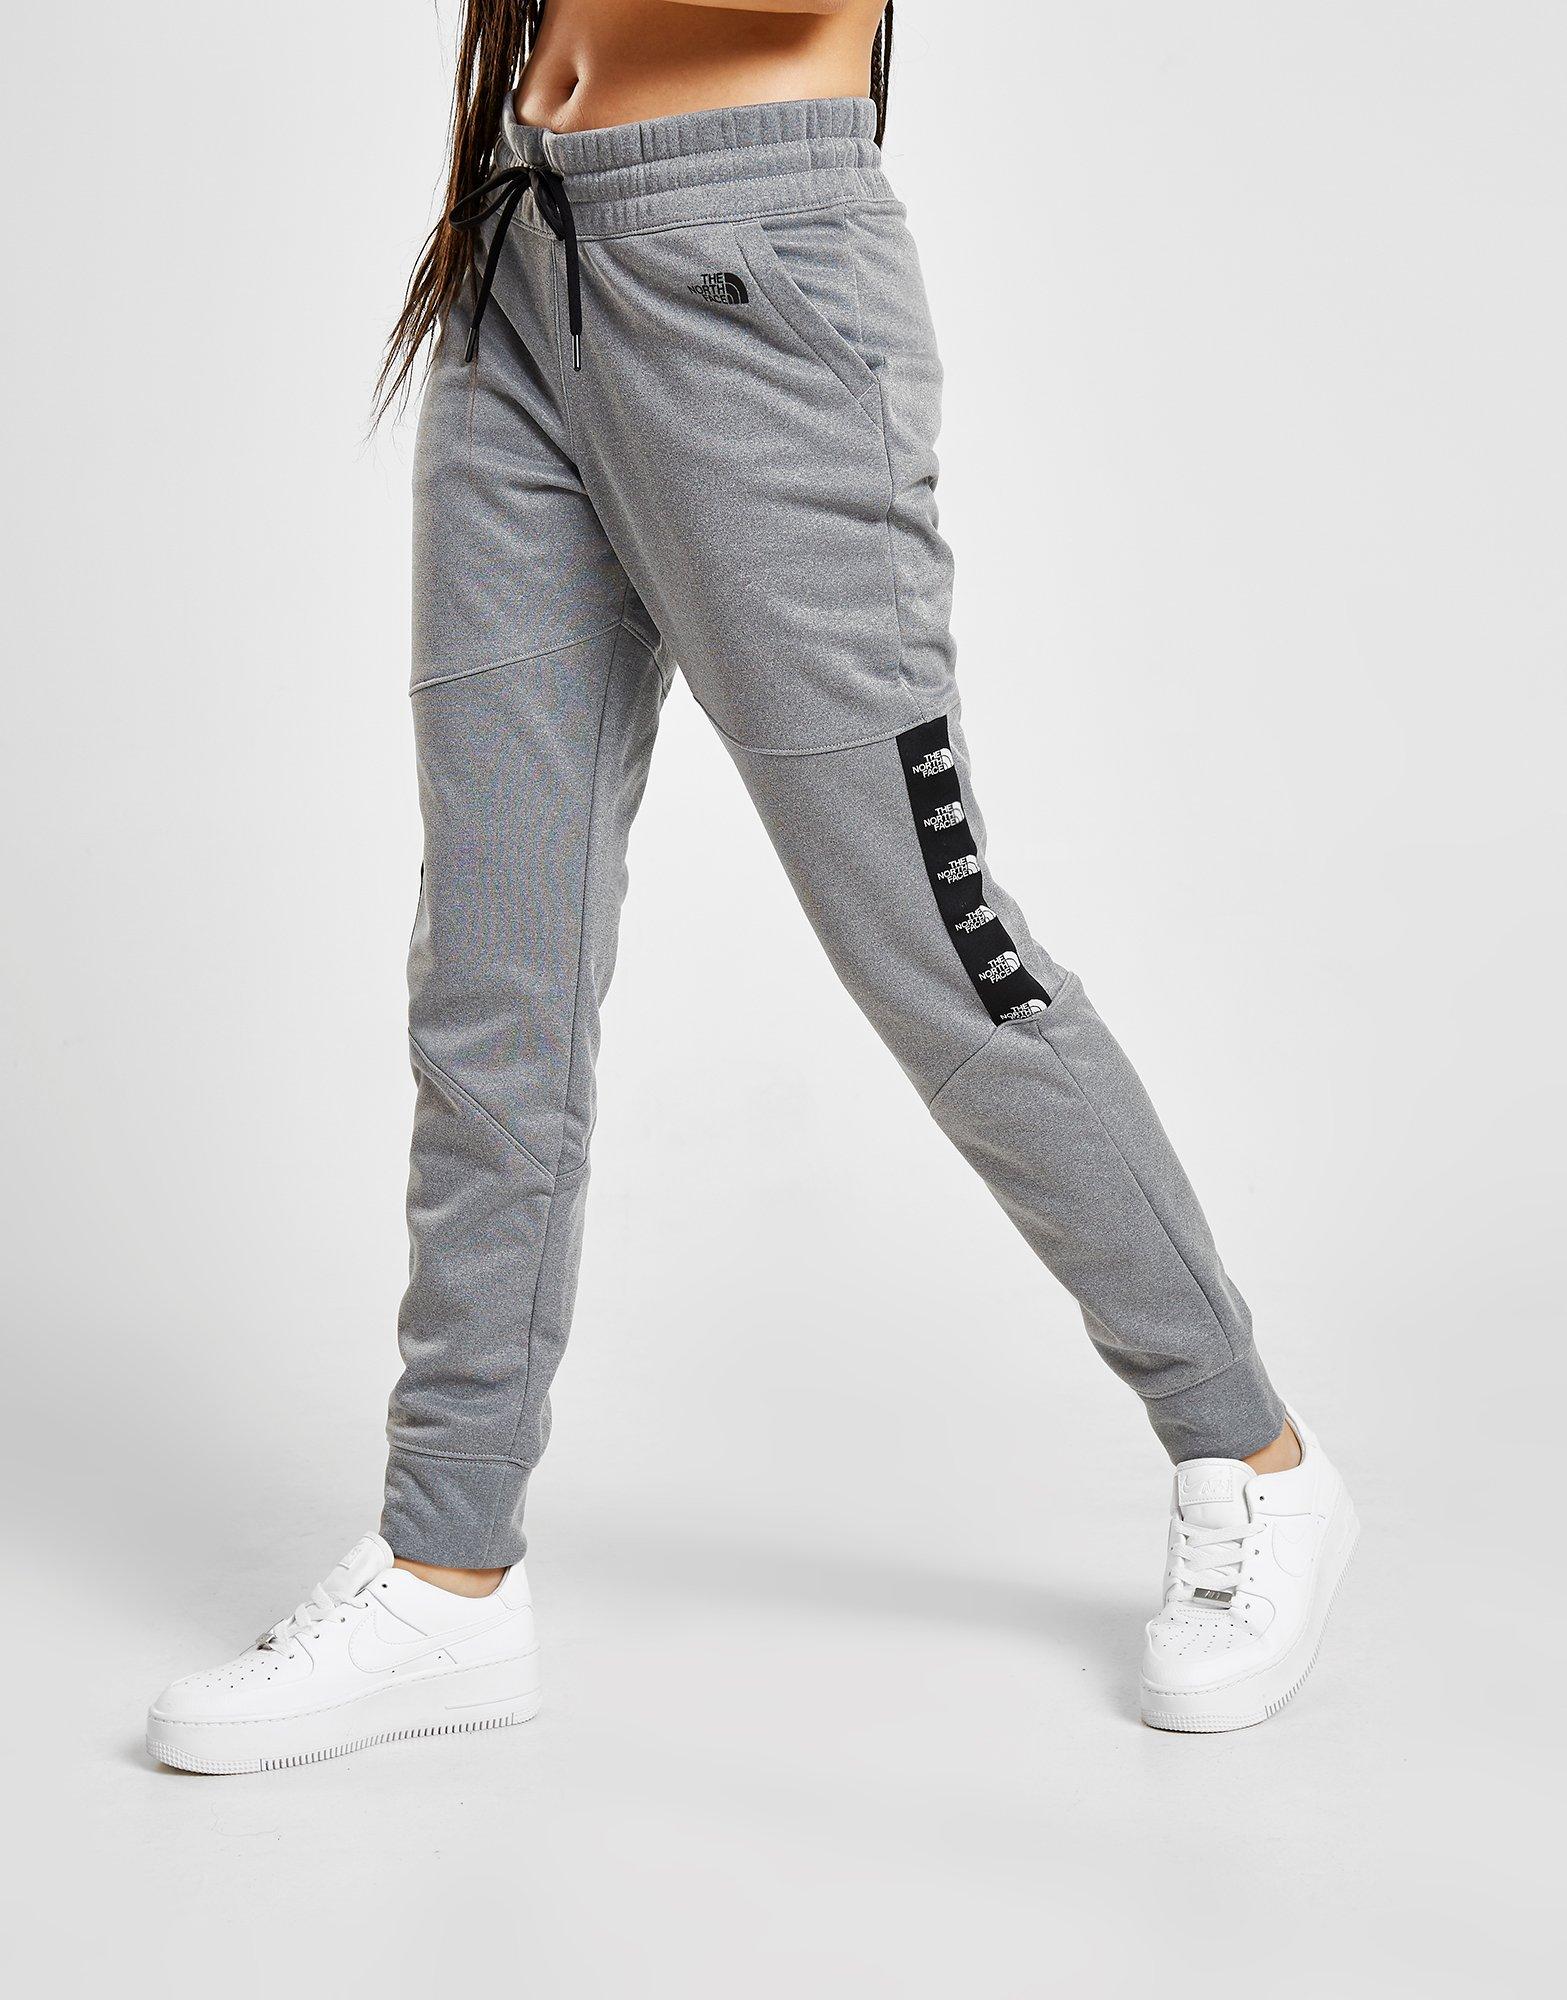 north face ladies joggers